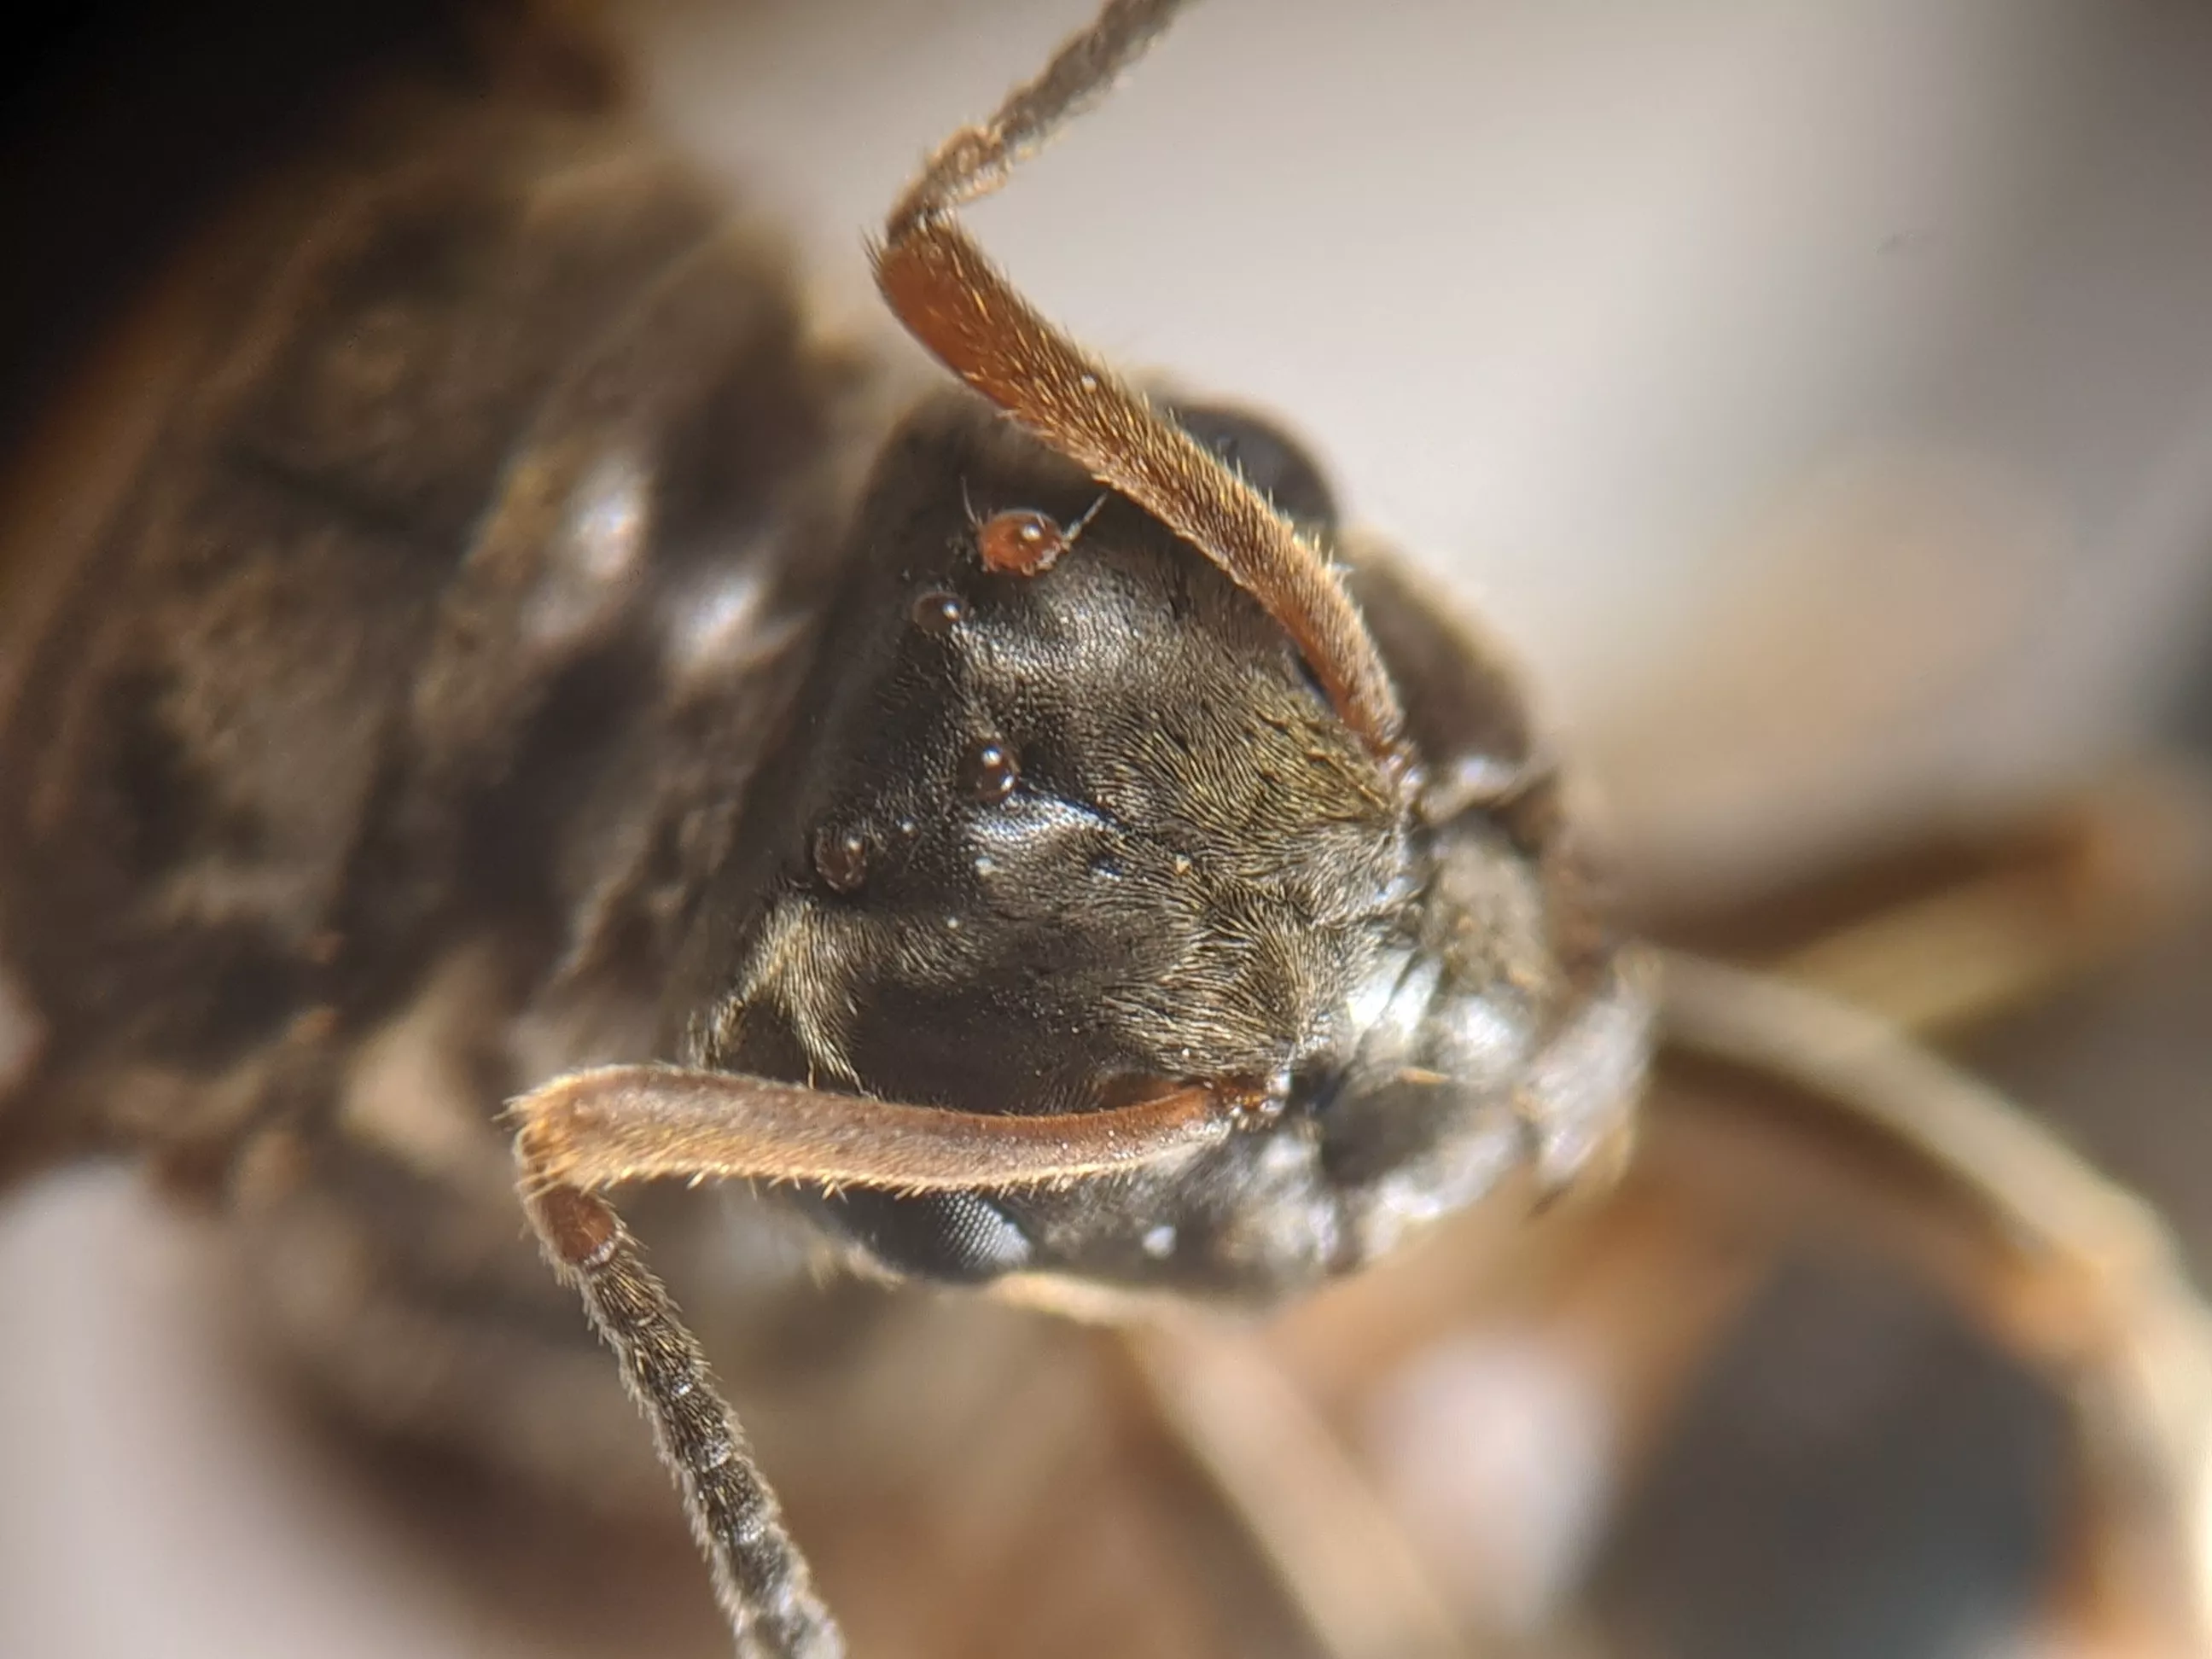 the head of a flying ant with a mite